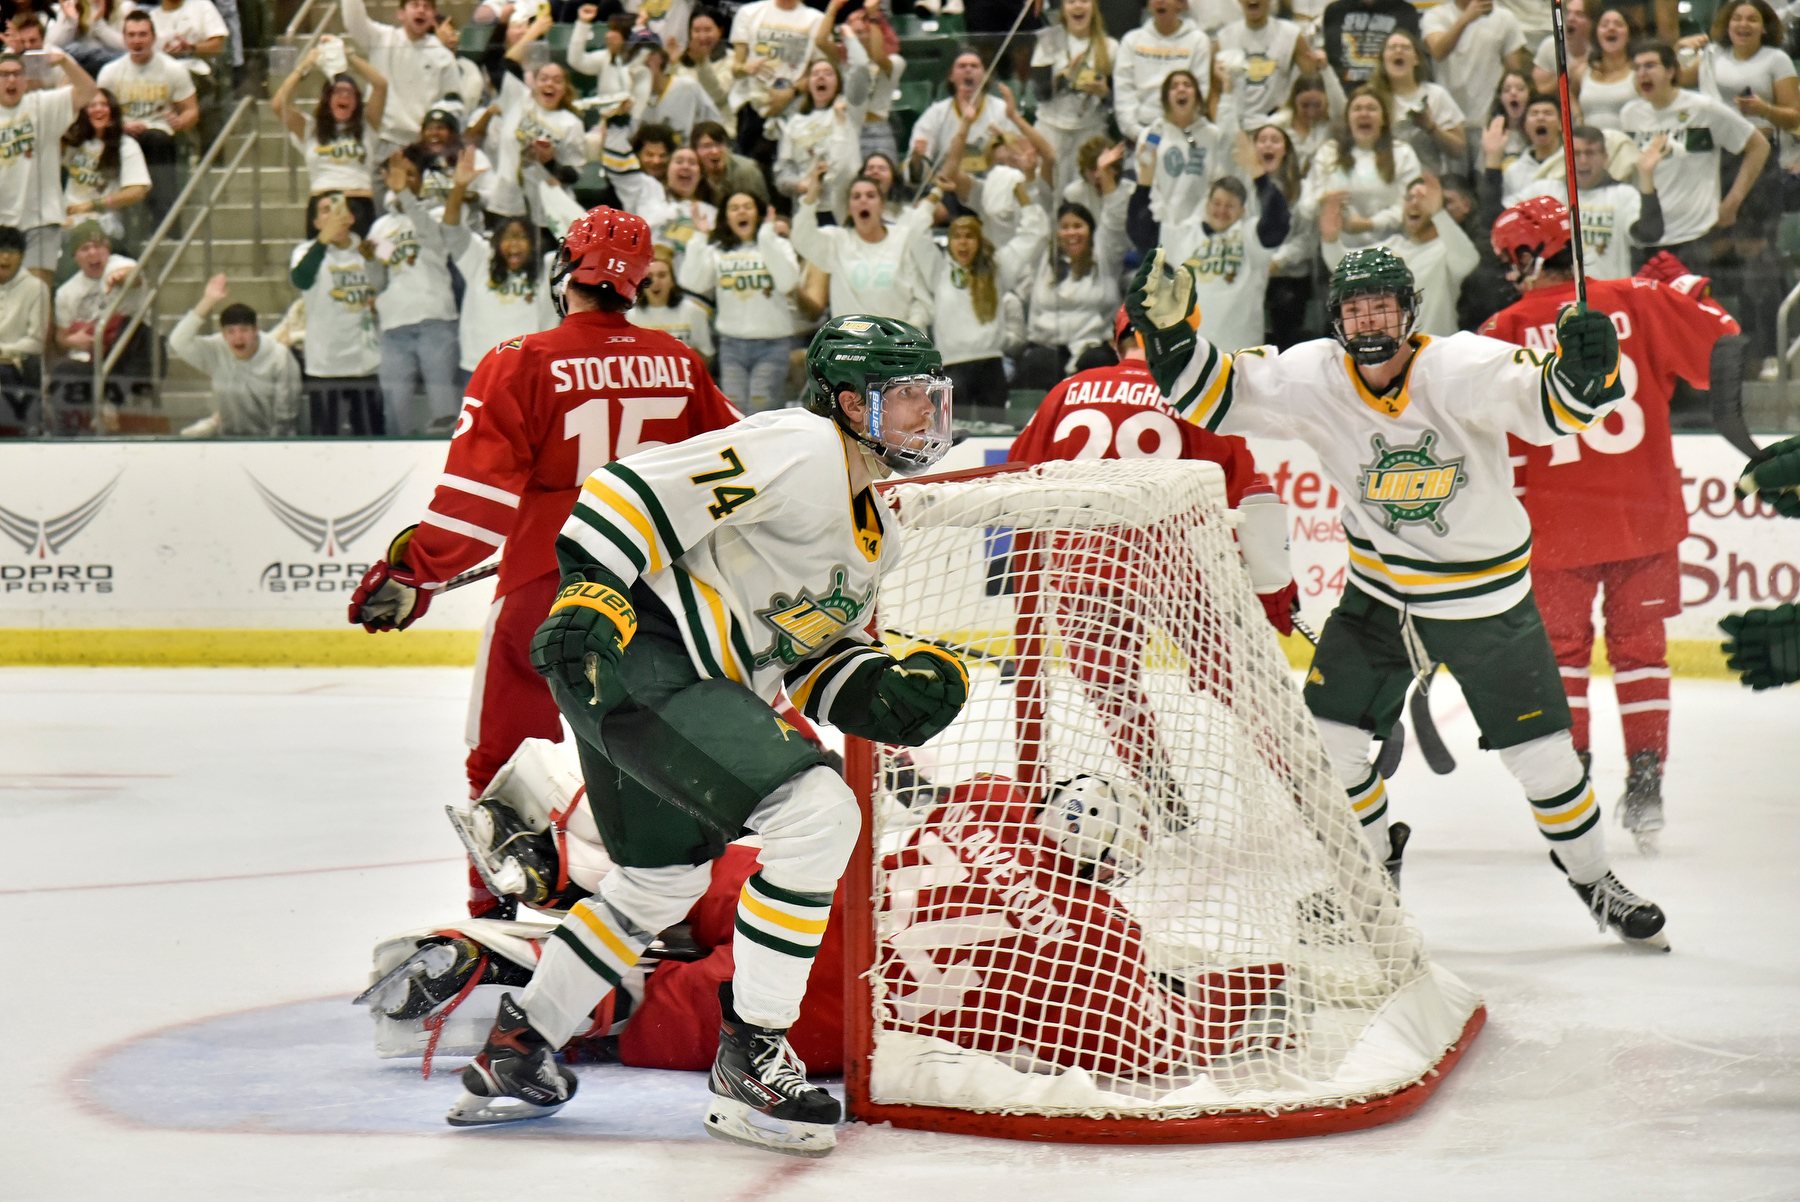 Ryan Dickinson (foreground #74), a junior defenseman, skates past the net after making the Lakers; fourth goal in 3rd period action accompanied by cheers from freshman forward Matt McQuade (#21, pictured), who scored Oswego's first goal in the game, along with the Oswego audience.